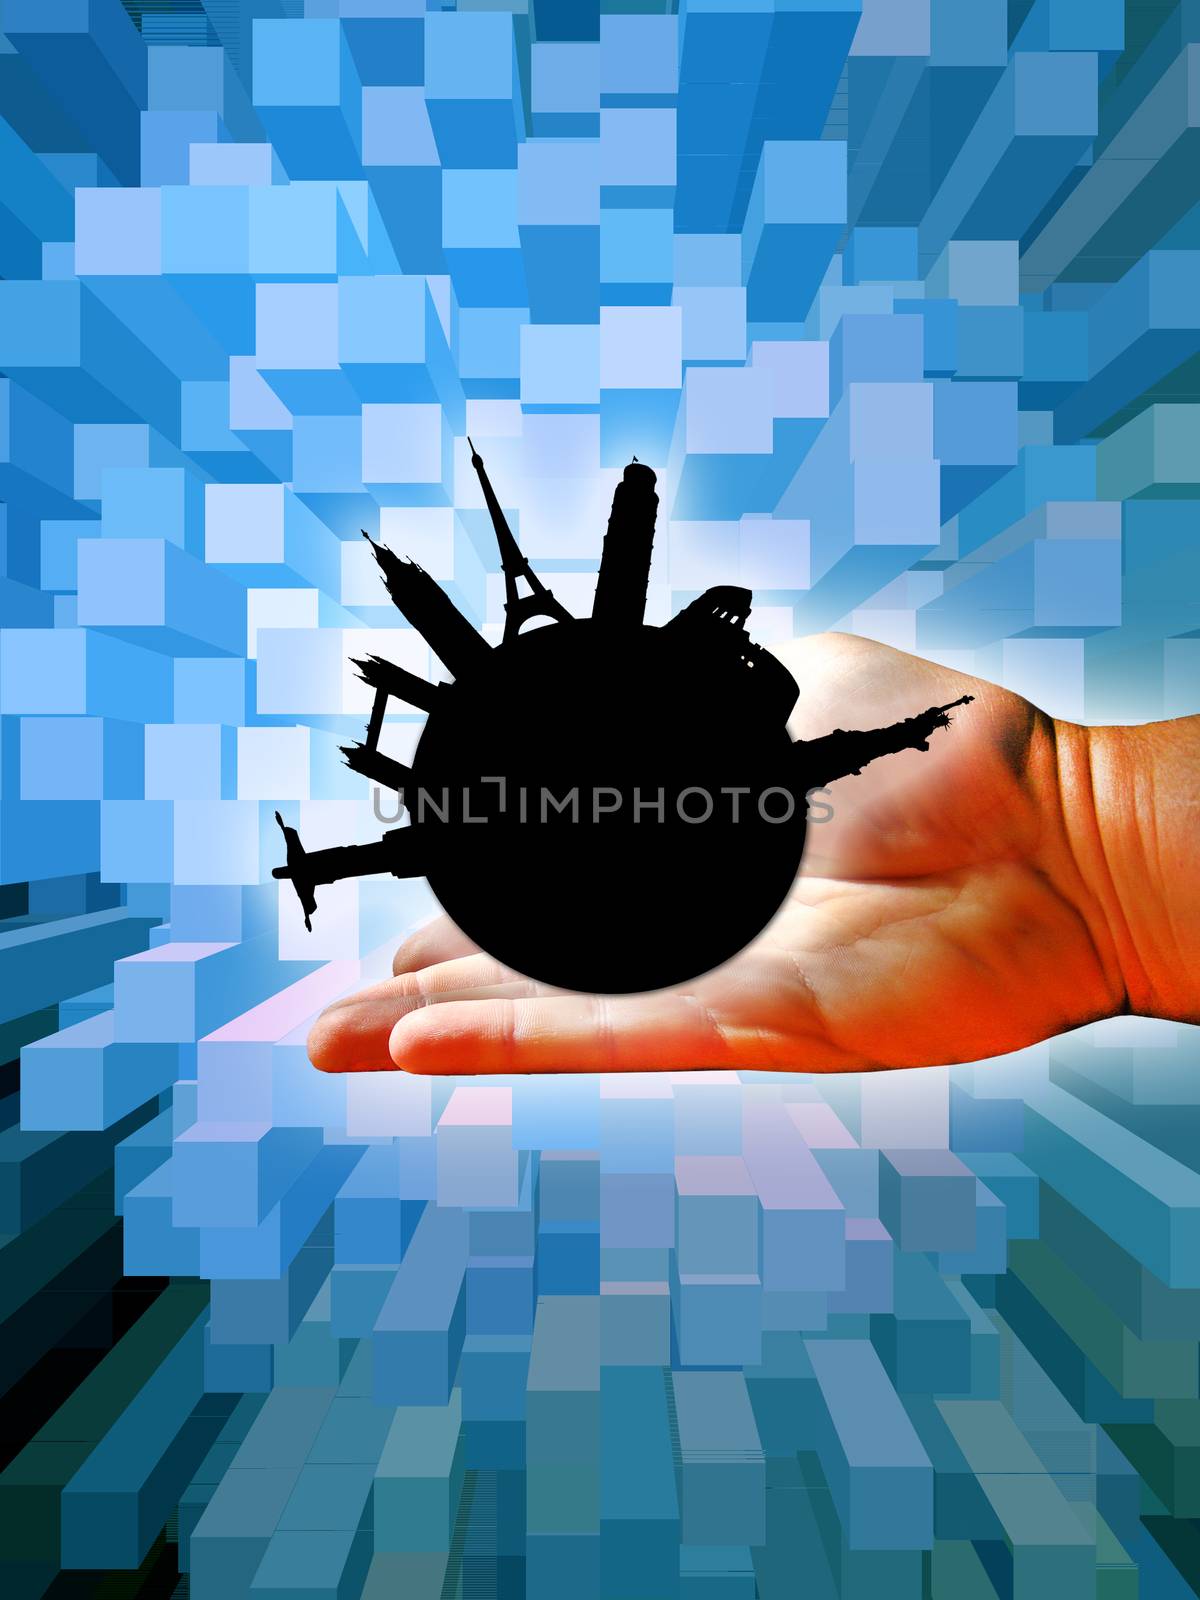 Black silhouettes of places of interest of Europe on the hand and on blue background